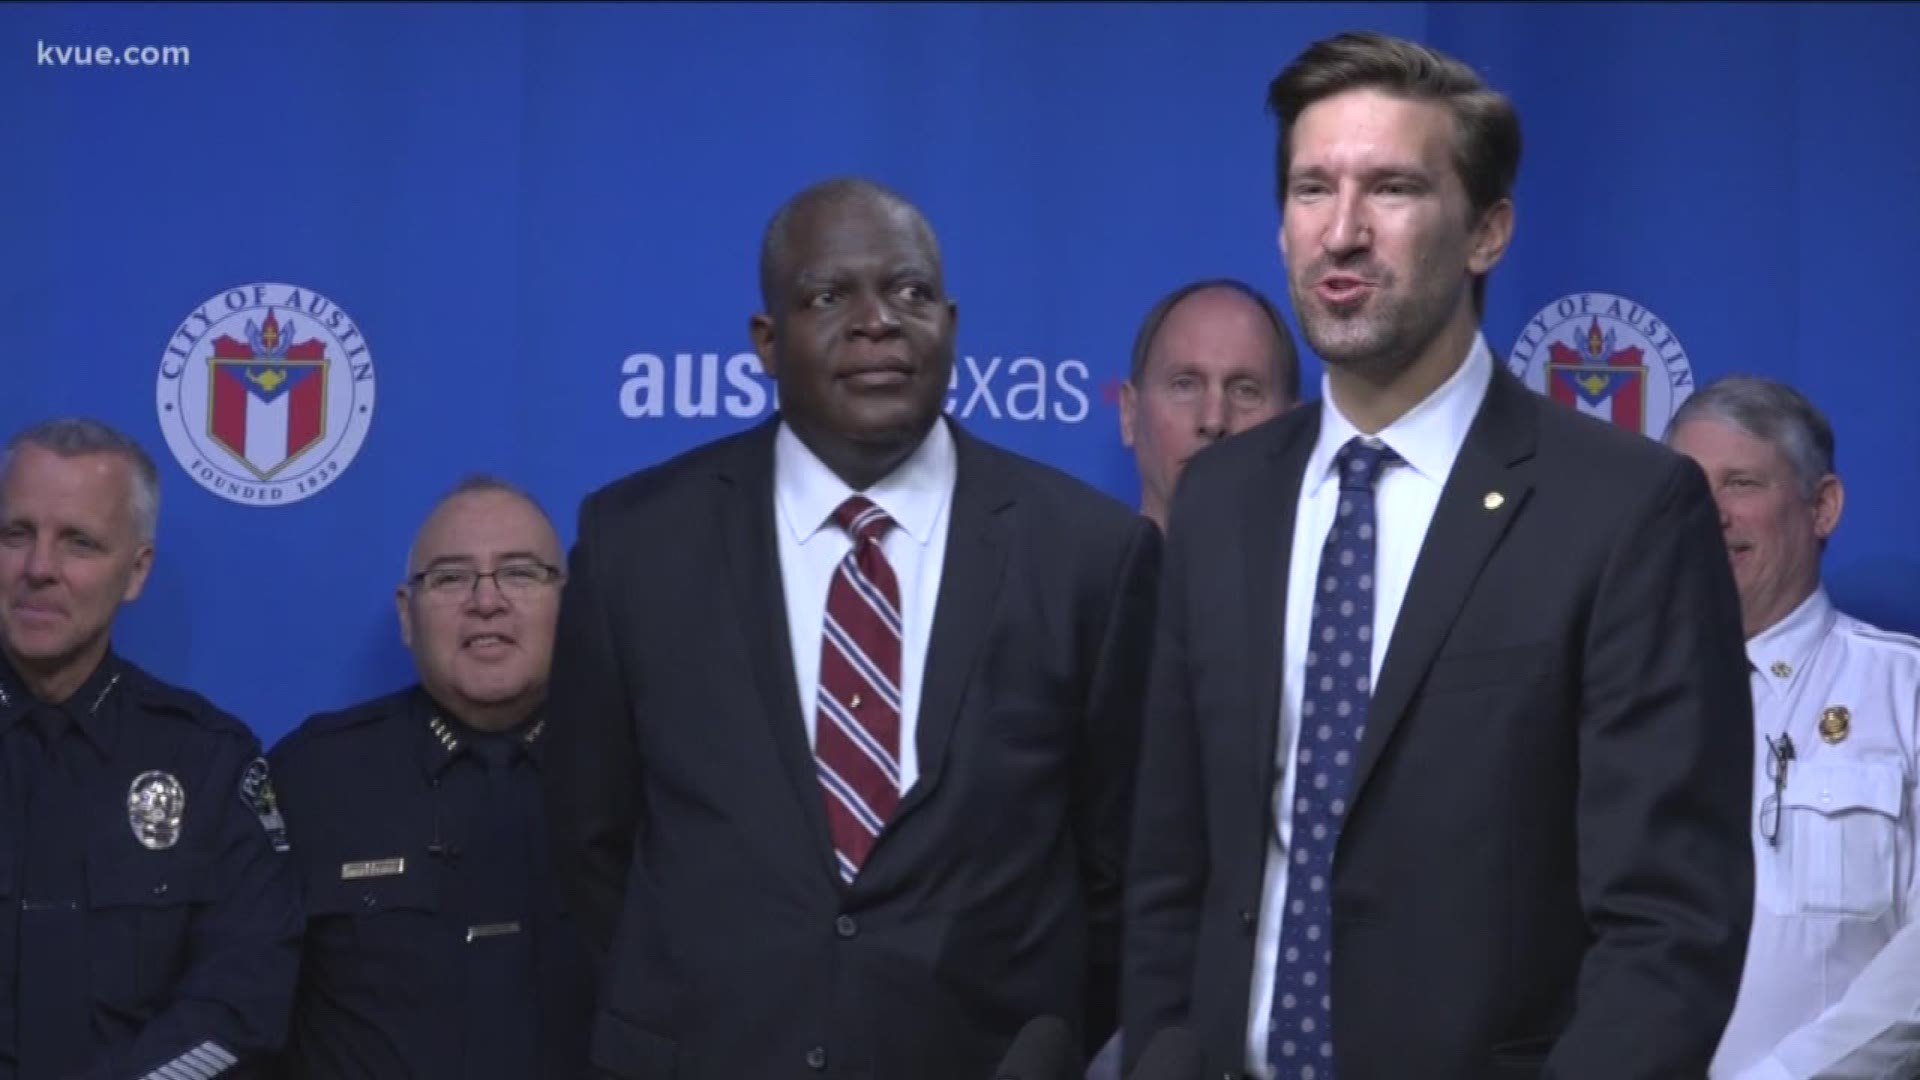 After nearly a year without a labor contract between Austin police officers and the City of Austin, Austin's police union -- the Austin Police Association -- and the city council have approved a new contract.
STORY: http://www.kvue.com/news/local/austin-p